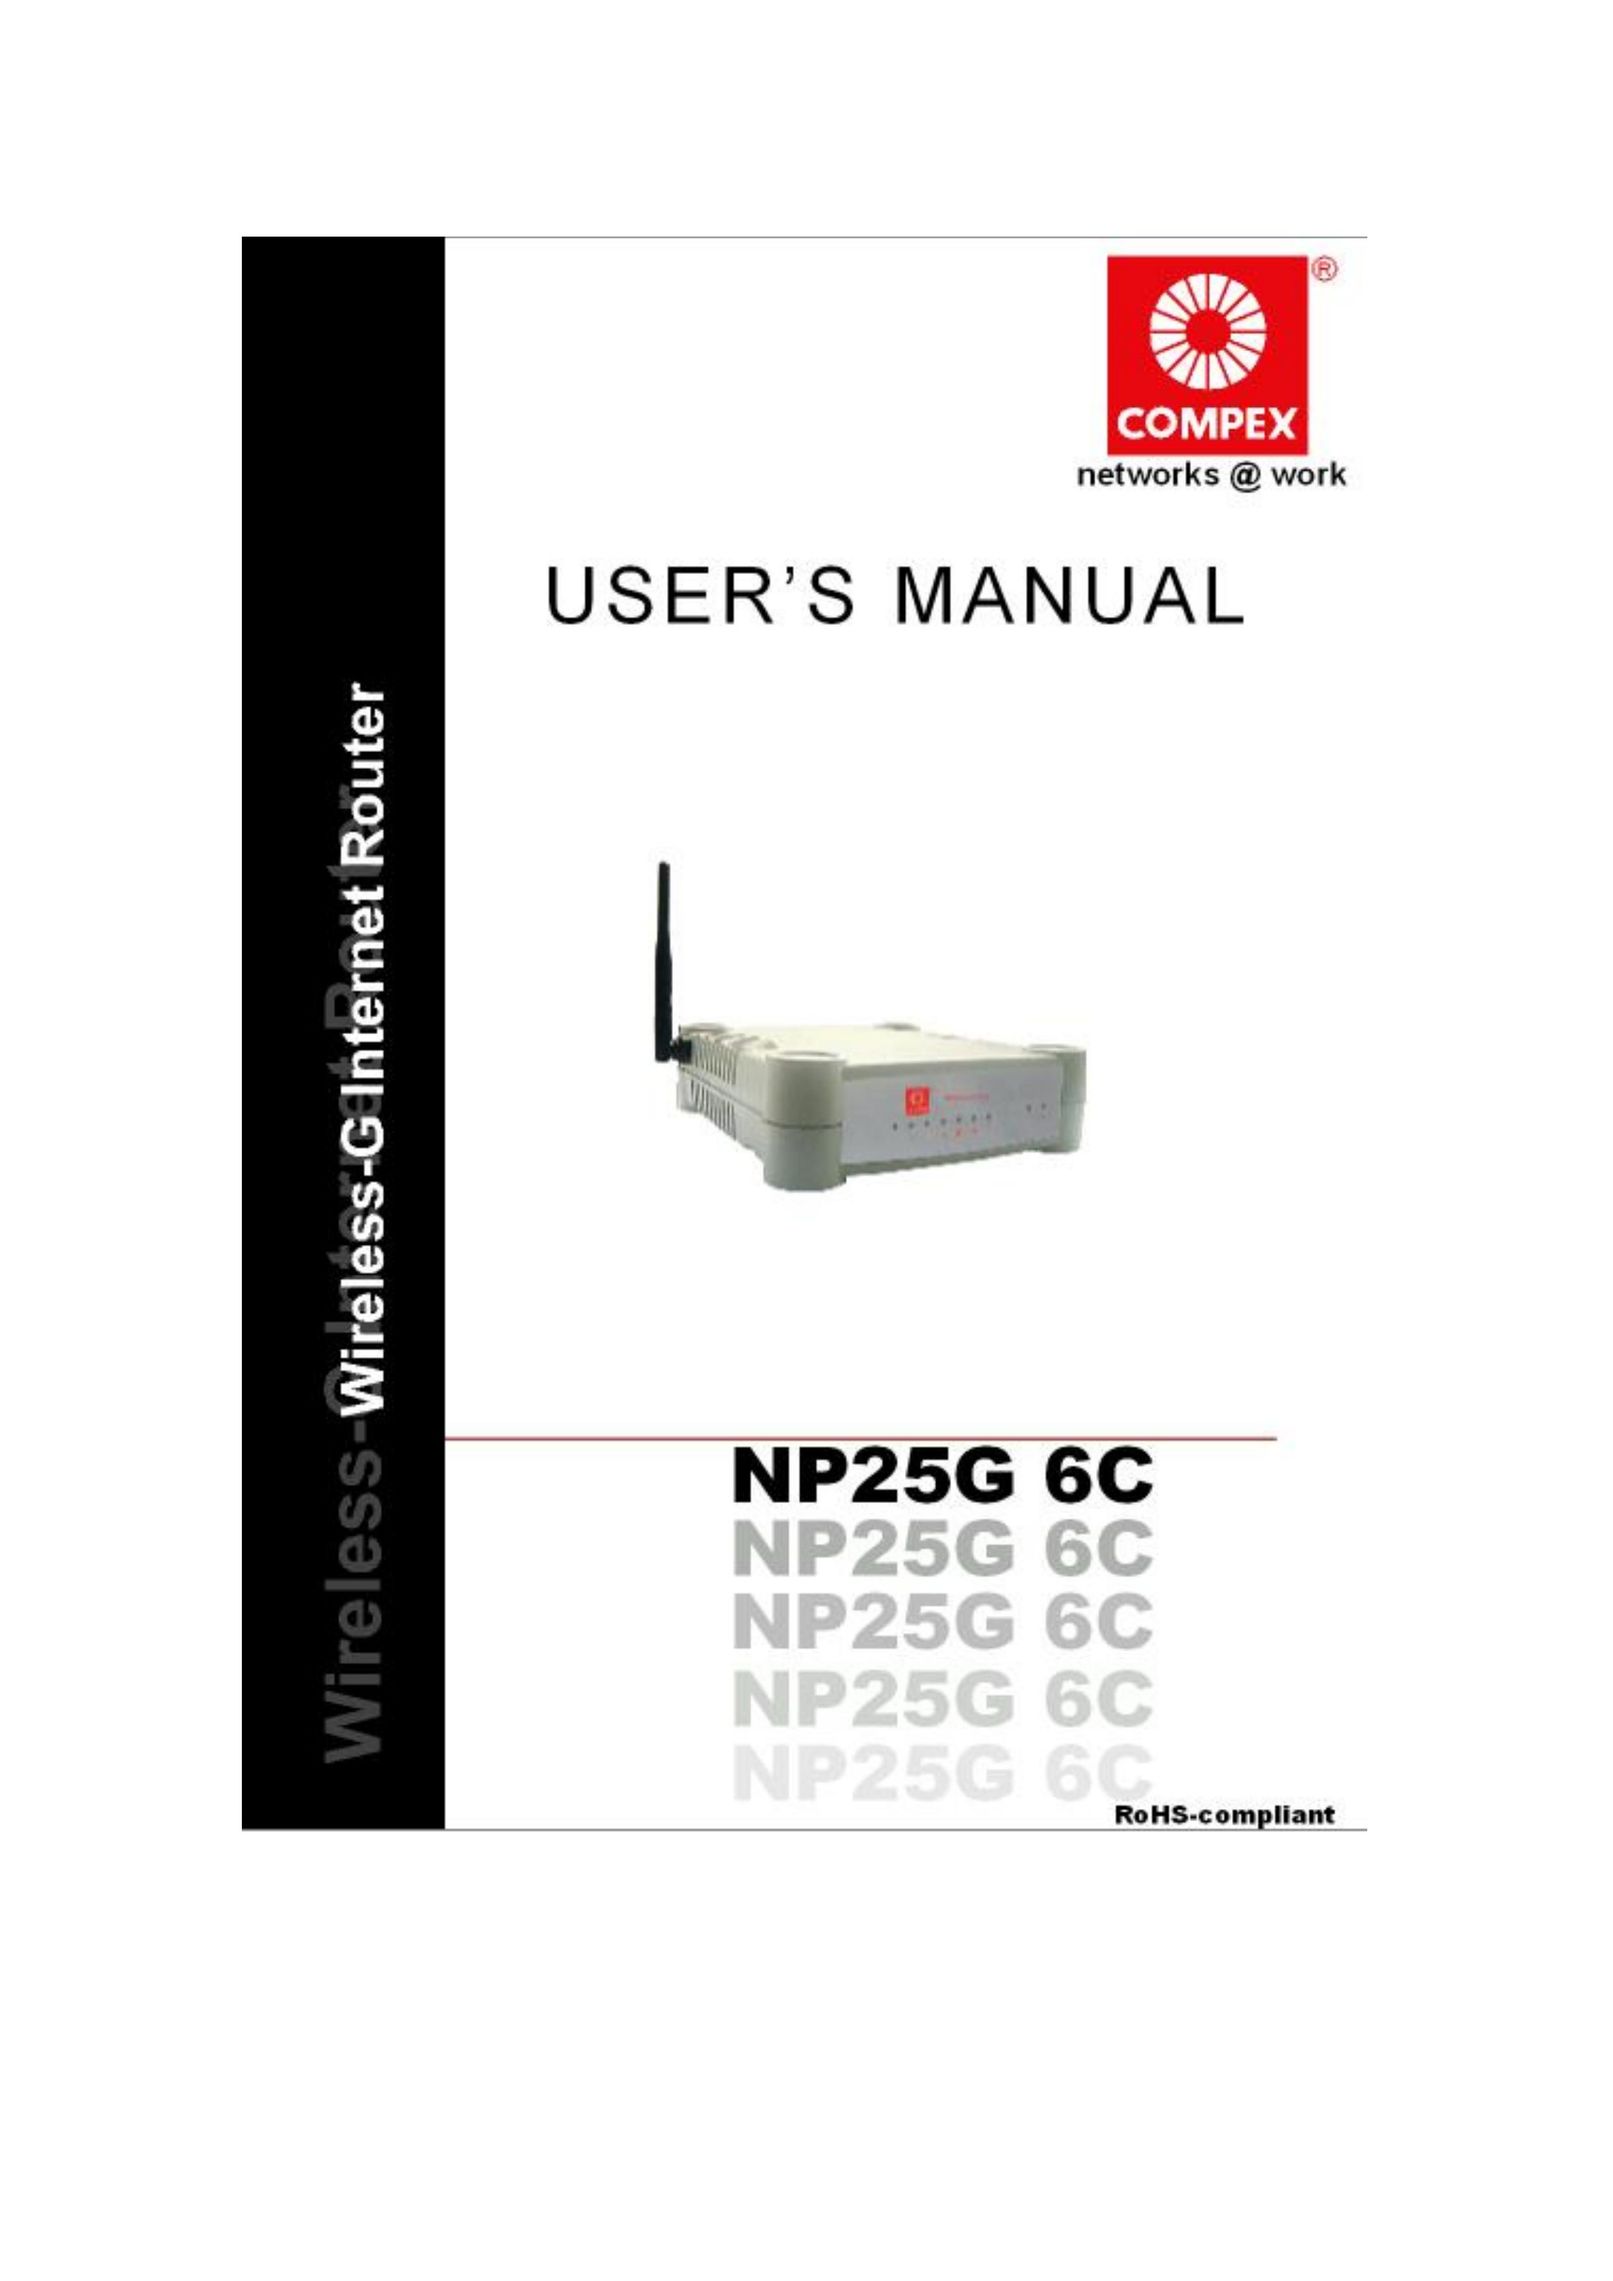 Compex Technologies NP25G 6C Network Router User Manual